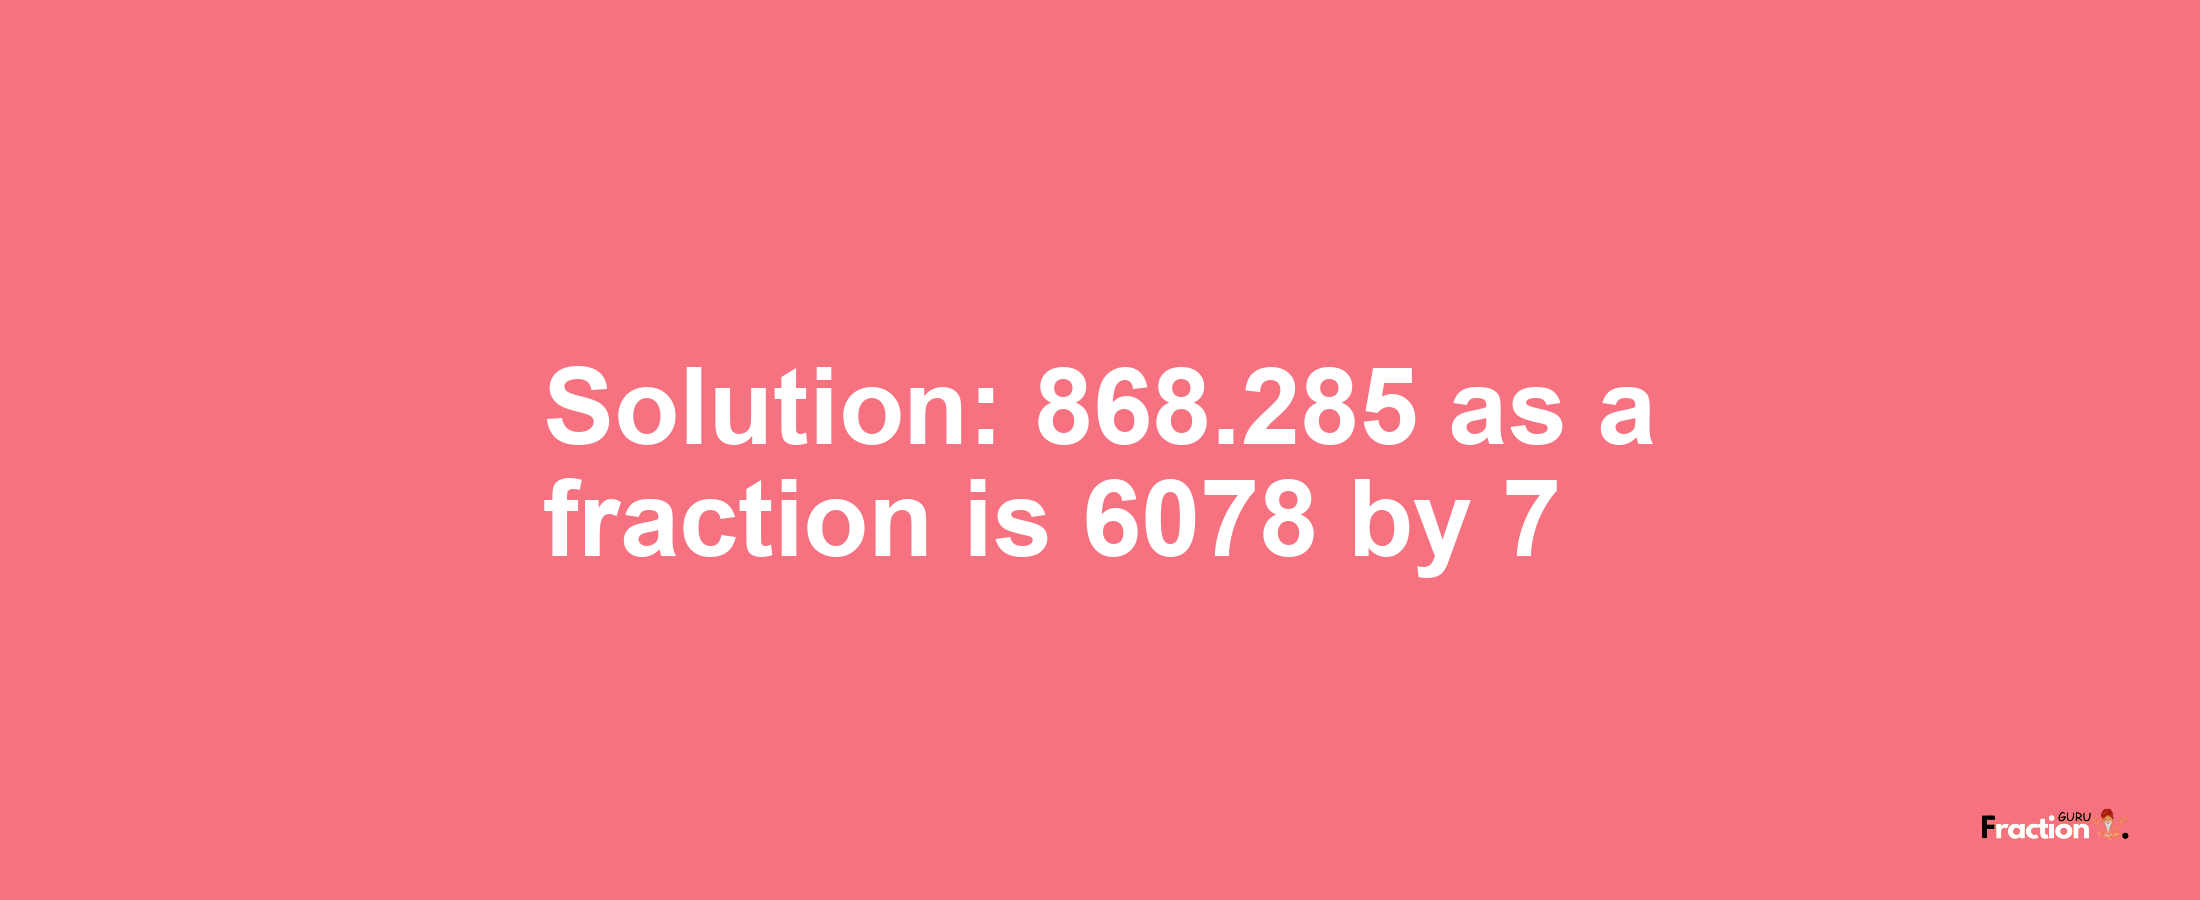 Solution:868.285 as a fraction is 6078/7